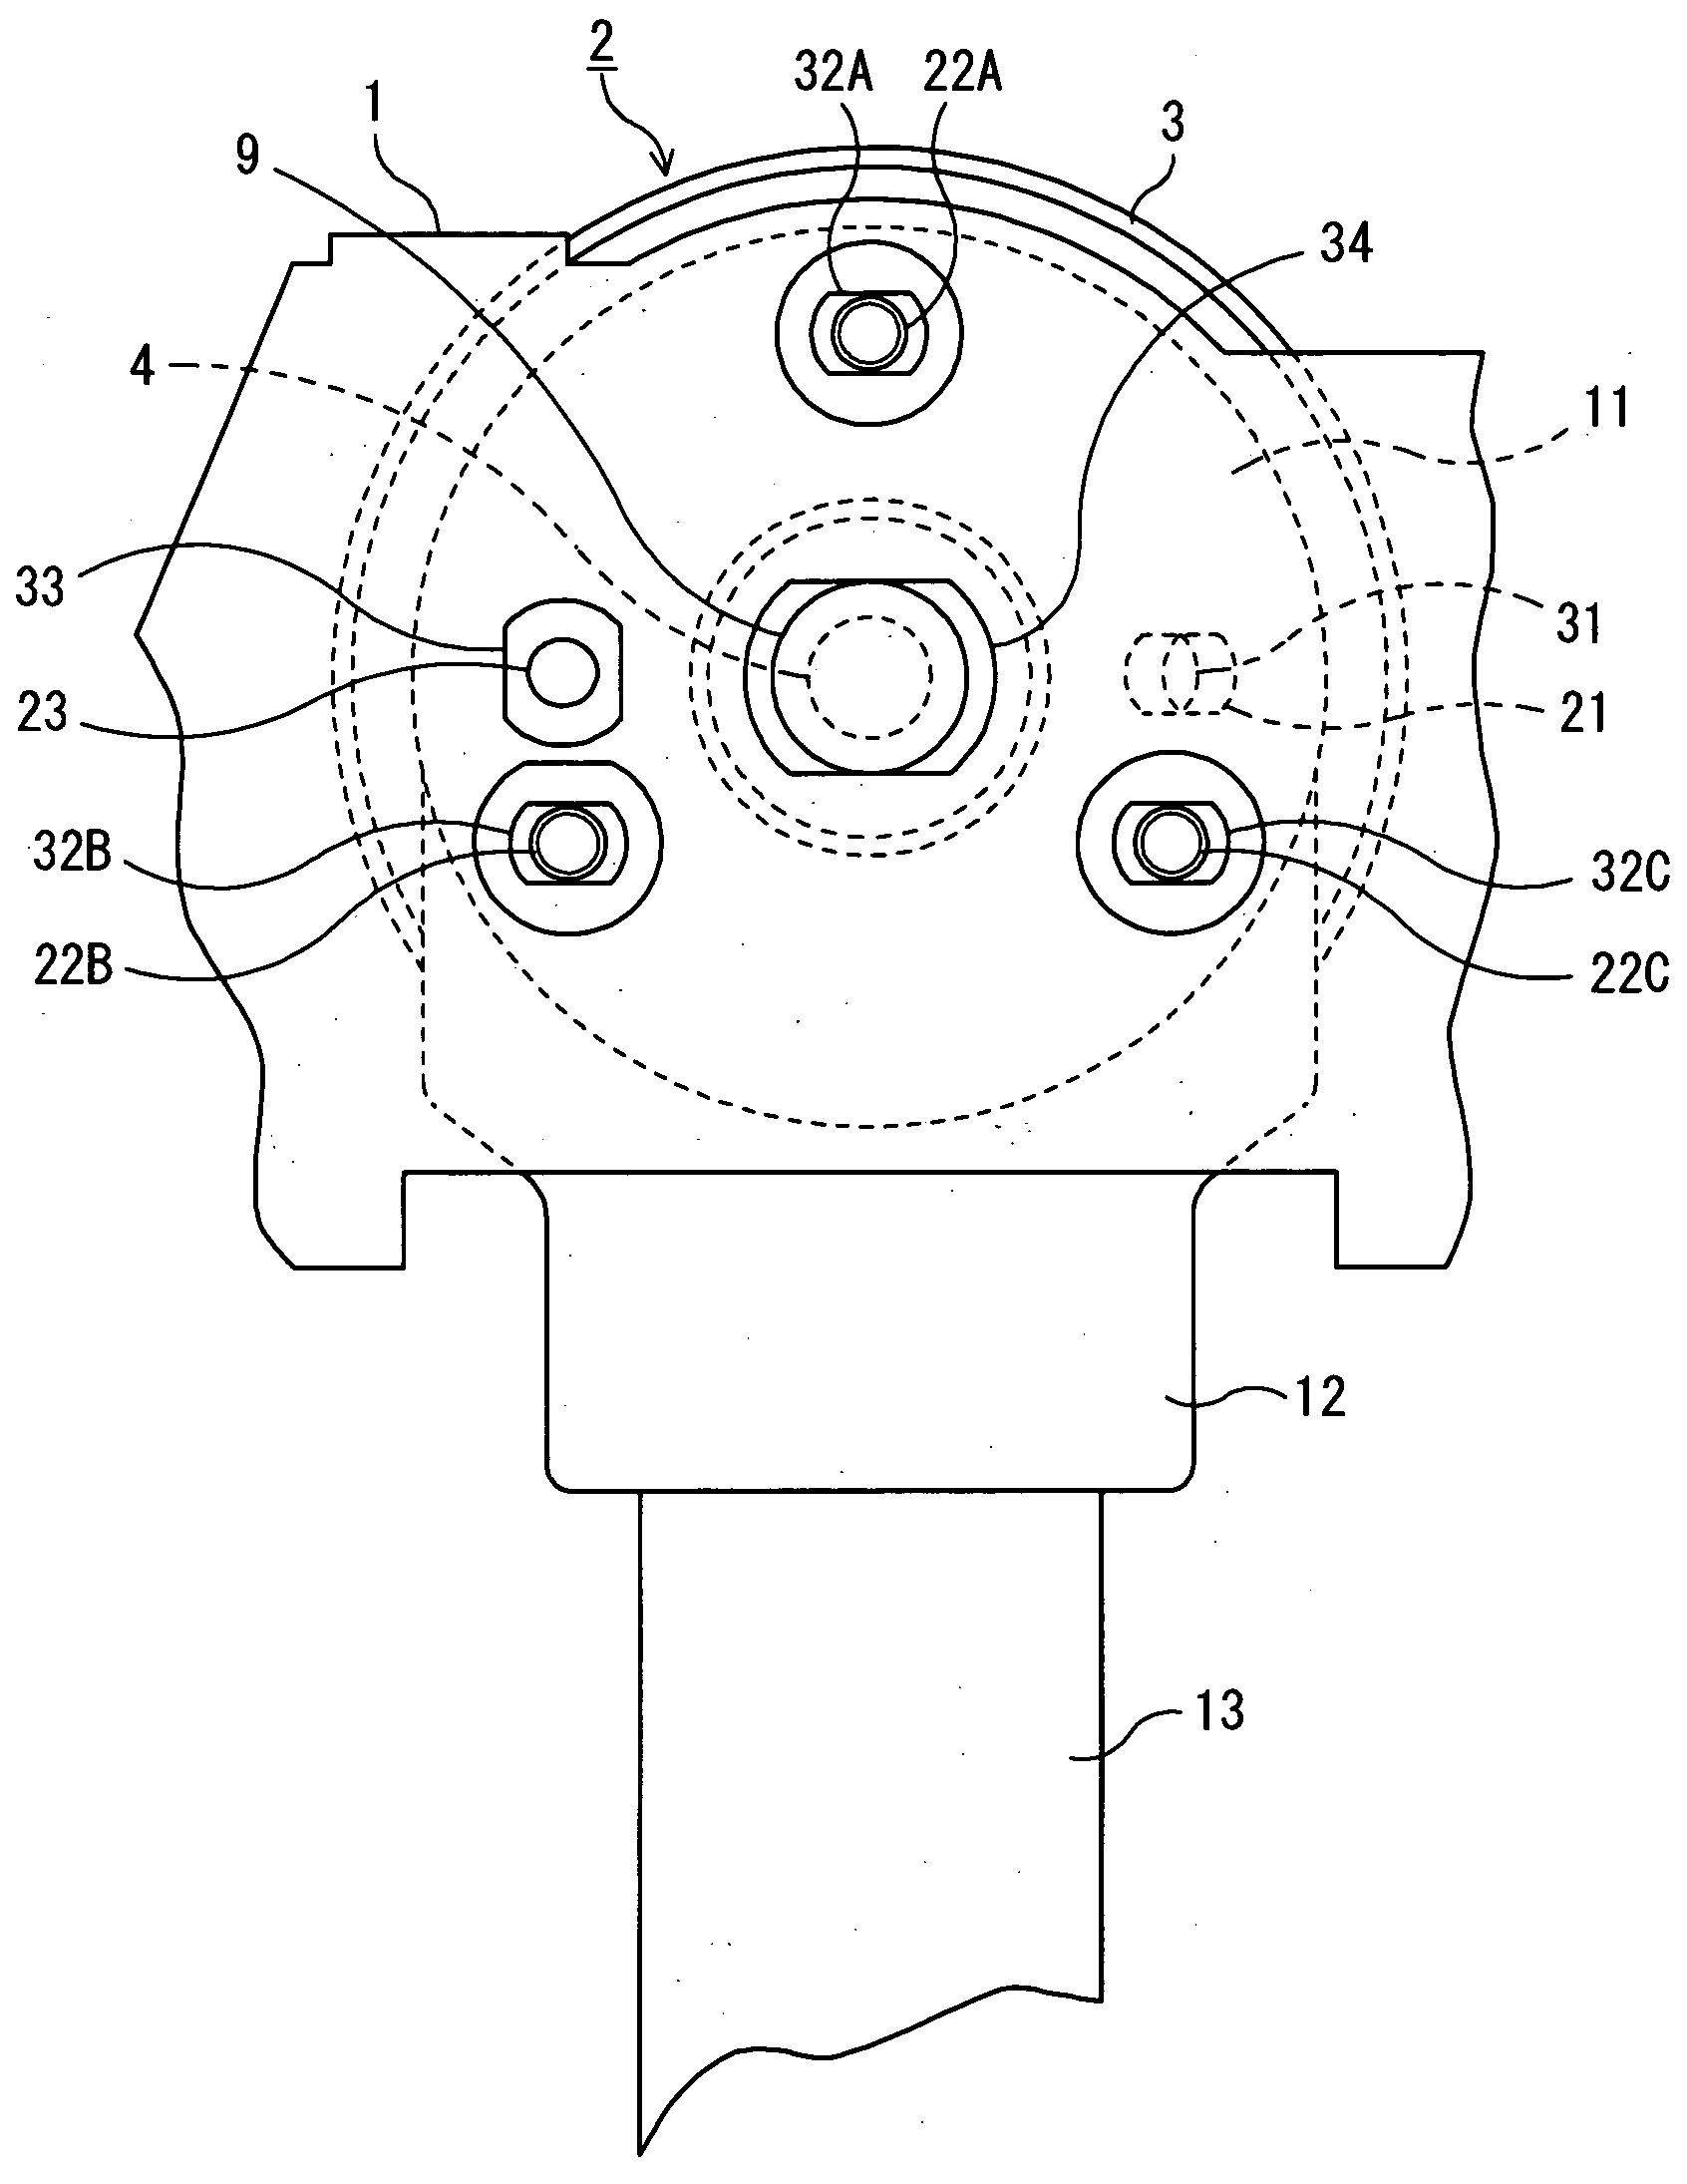 Structure for fixing spindle motor to traverse chassis